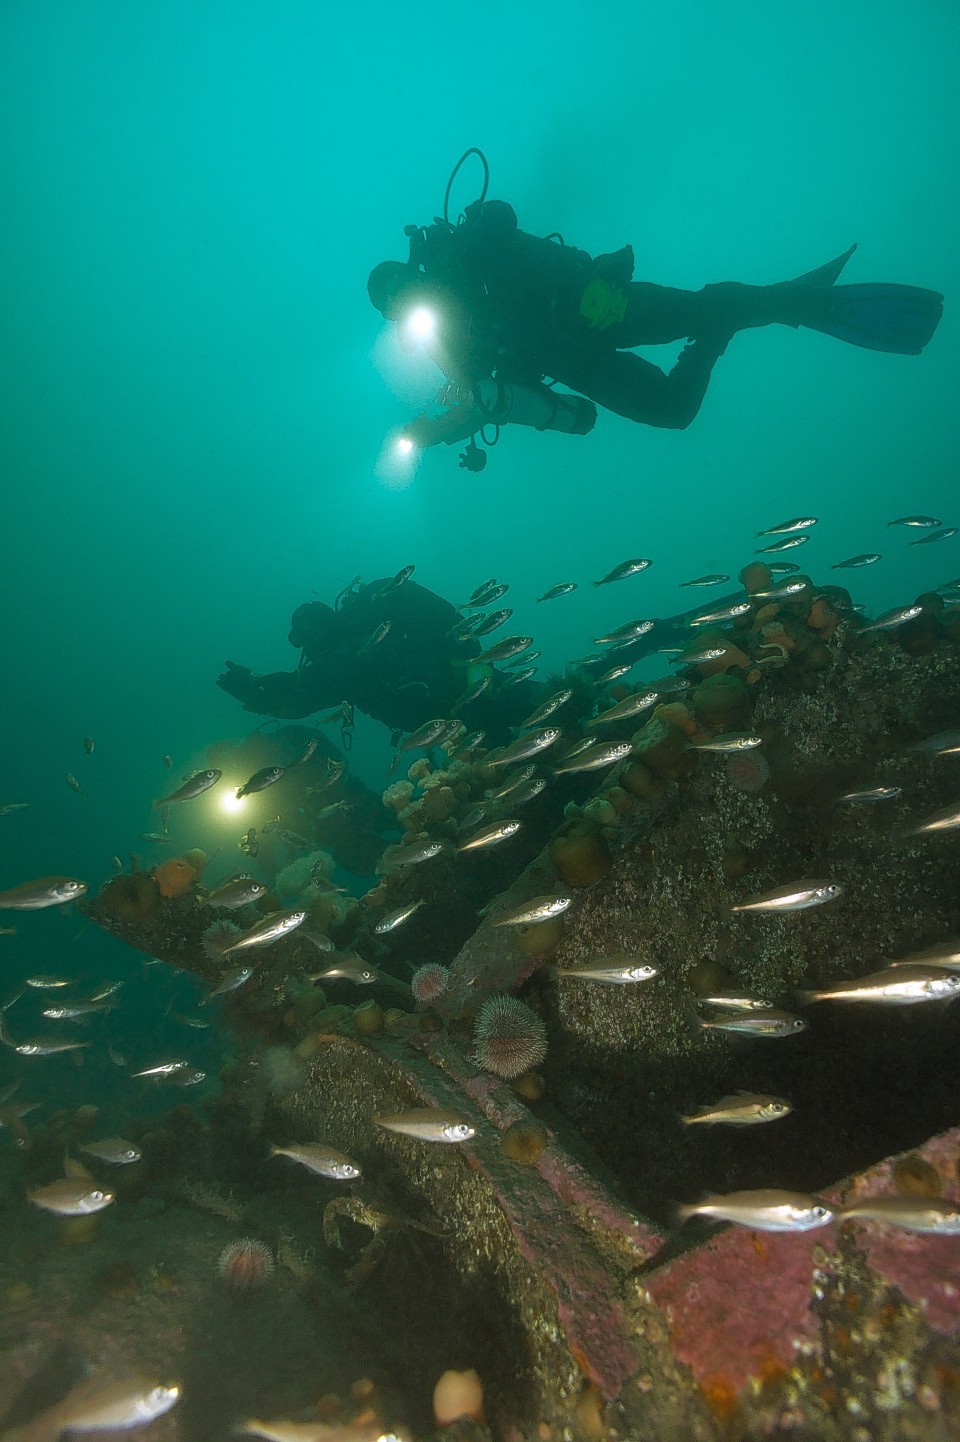 Fish swim past scuba divers as they survey WW1 shipwreck in Orkney.